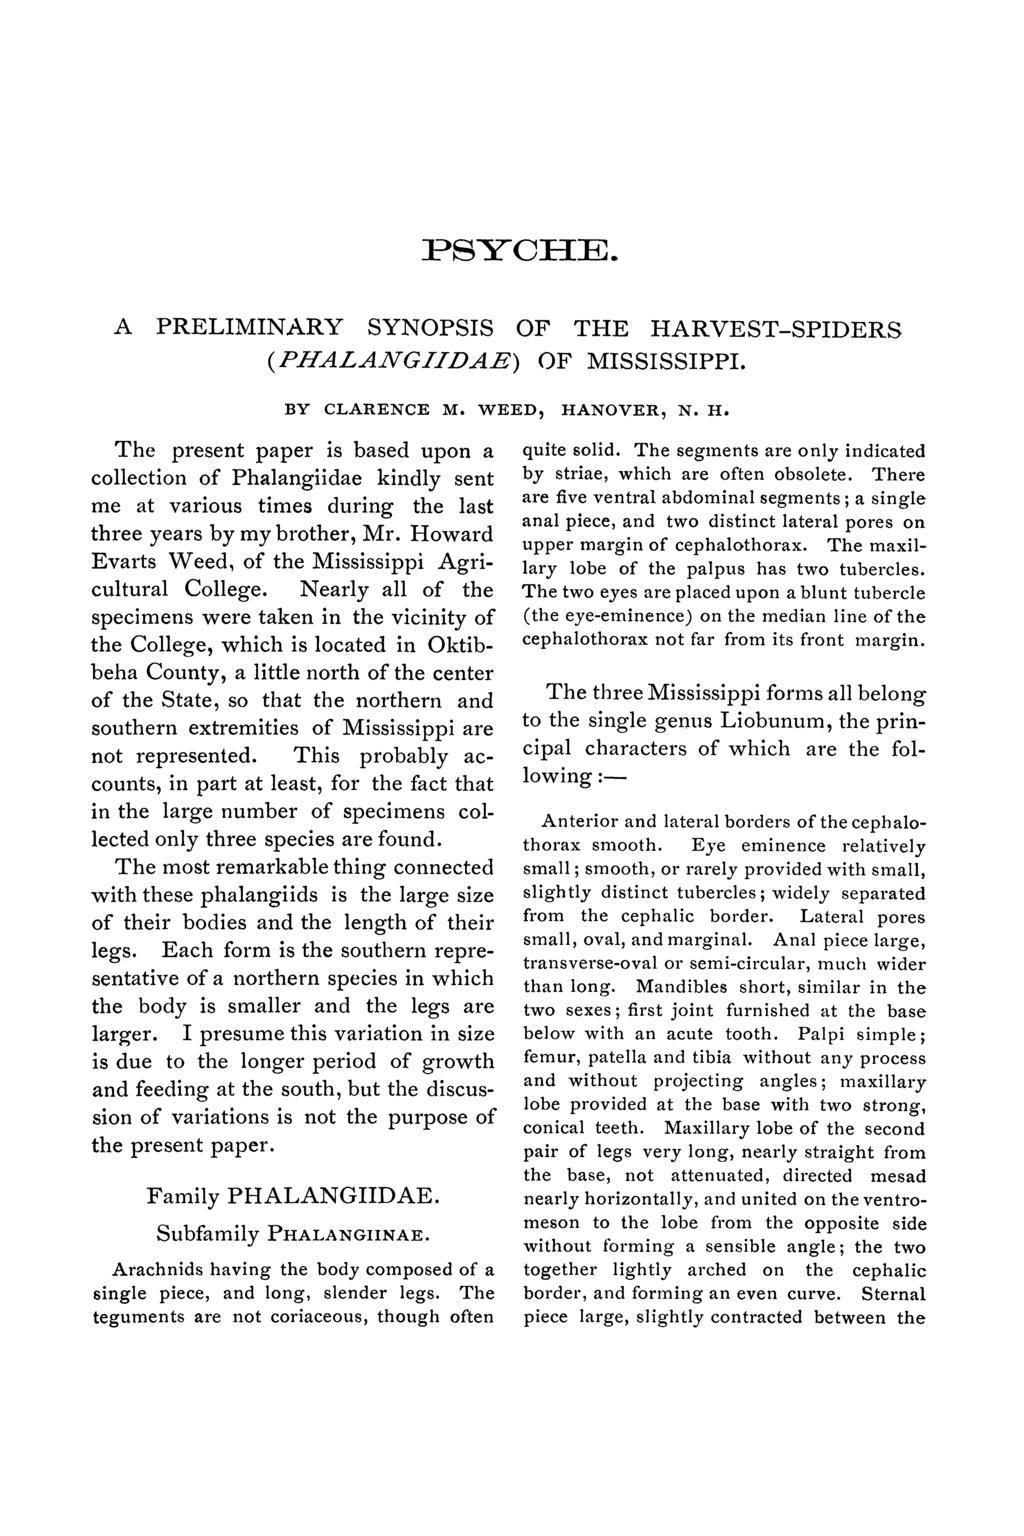 PYCHE. A PRELIMINARY SYNOPSIS OF THE HARVEST-SPIDERS (PHALANGIIDAE) OF MISSISSIPPI. BY CLARENCE M. WEED, HANOVER N. H. The present paper is based upon a collection of Phalangiidae kindly sent me at various times during the last three years by my brother, Mr.